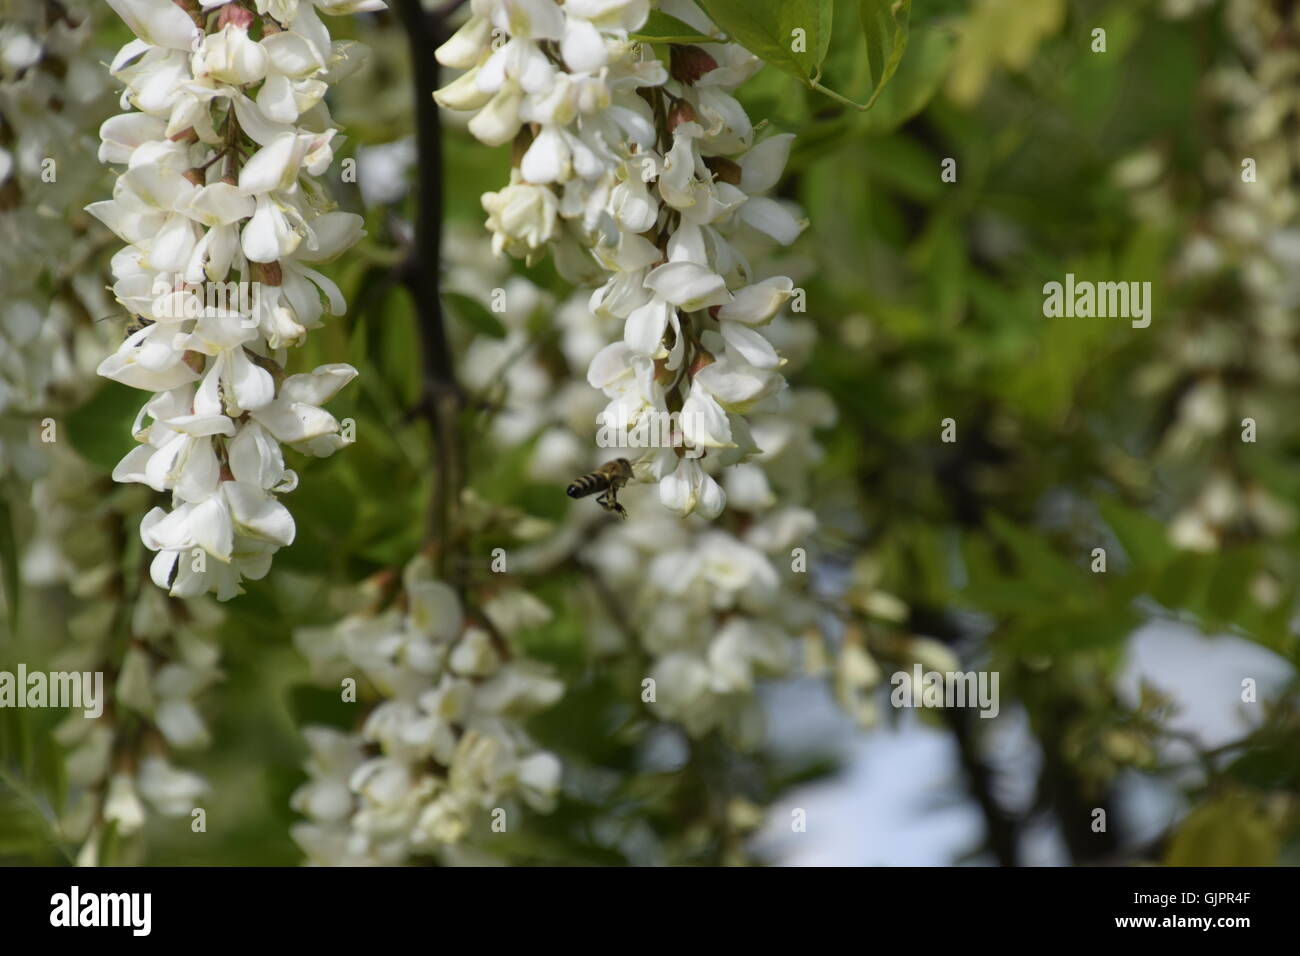 Flowering acacia white grapes. White flowers of prickly acacia, pollinated by bees. Stock Photo